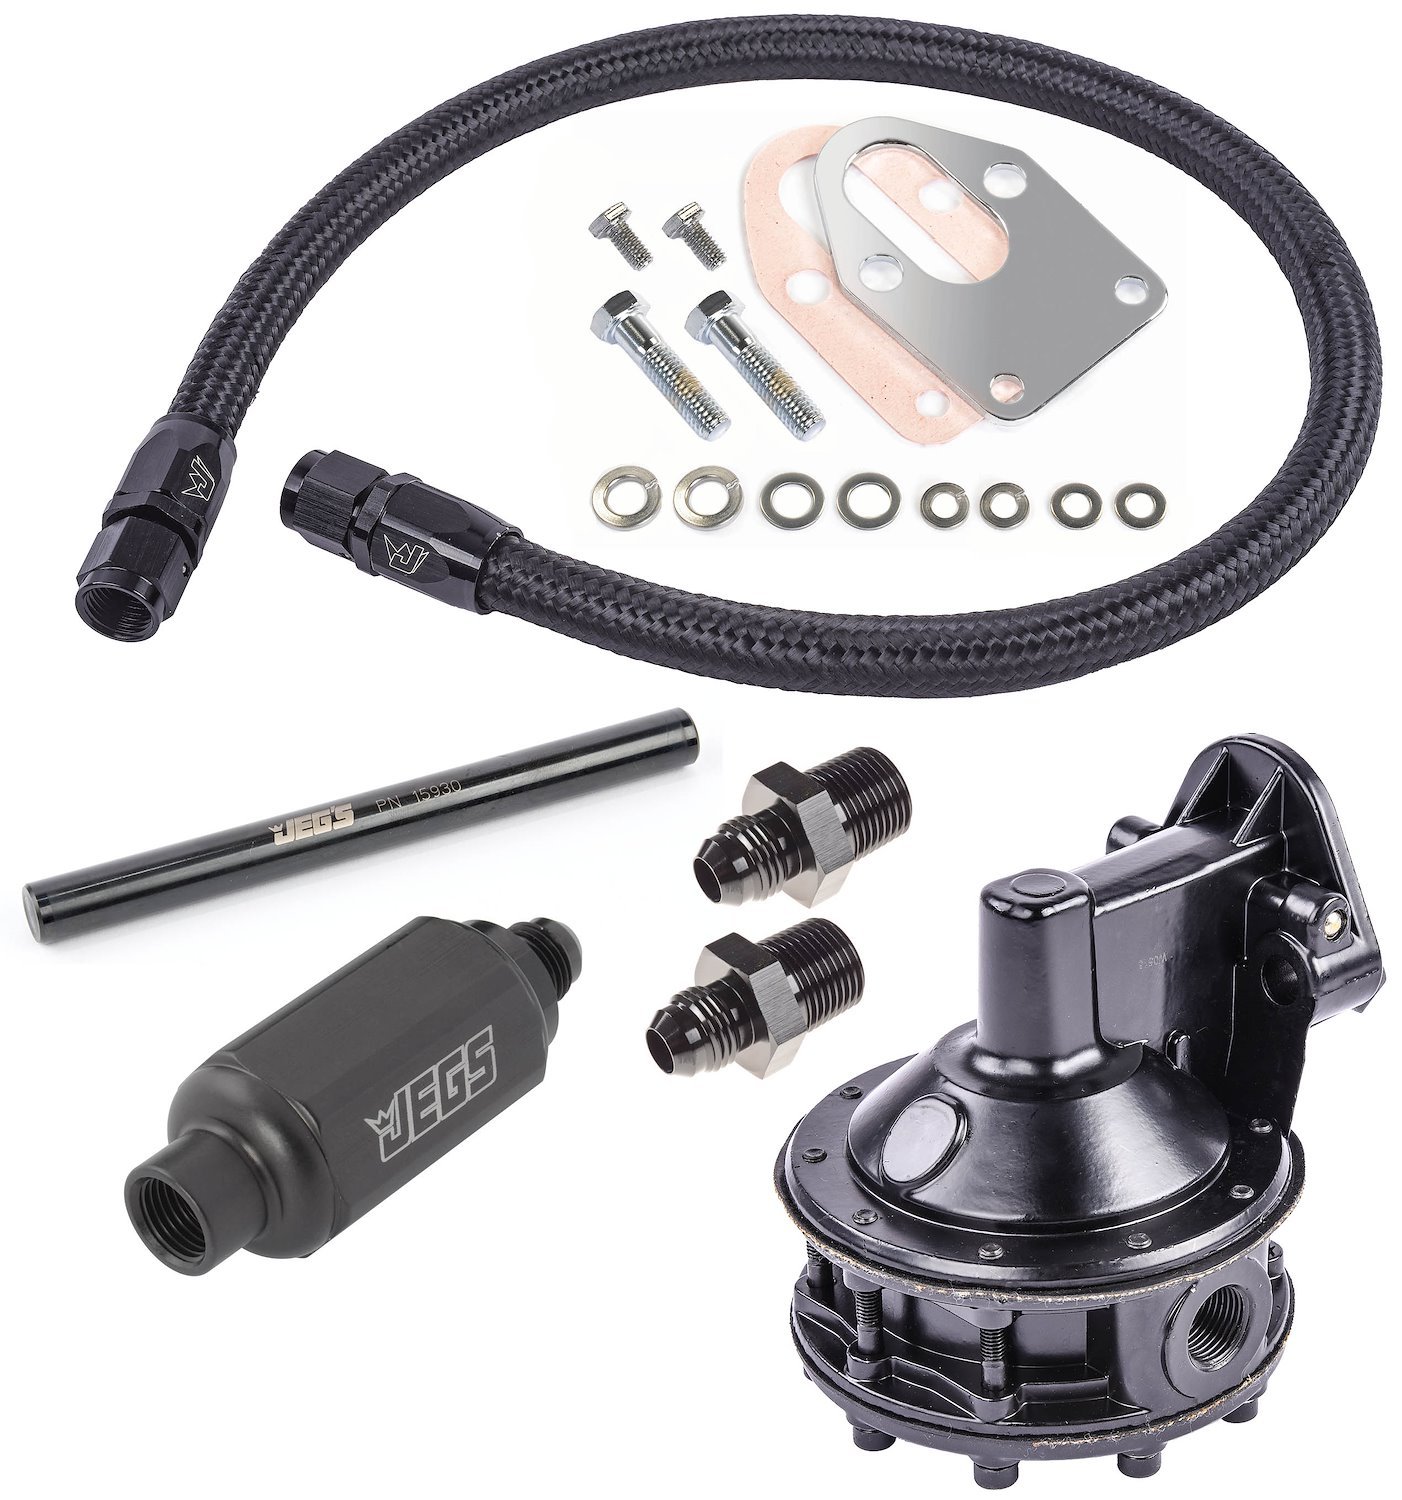 Mechanical Fuel Pump & Installation Kit for Small